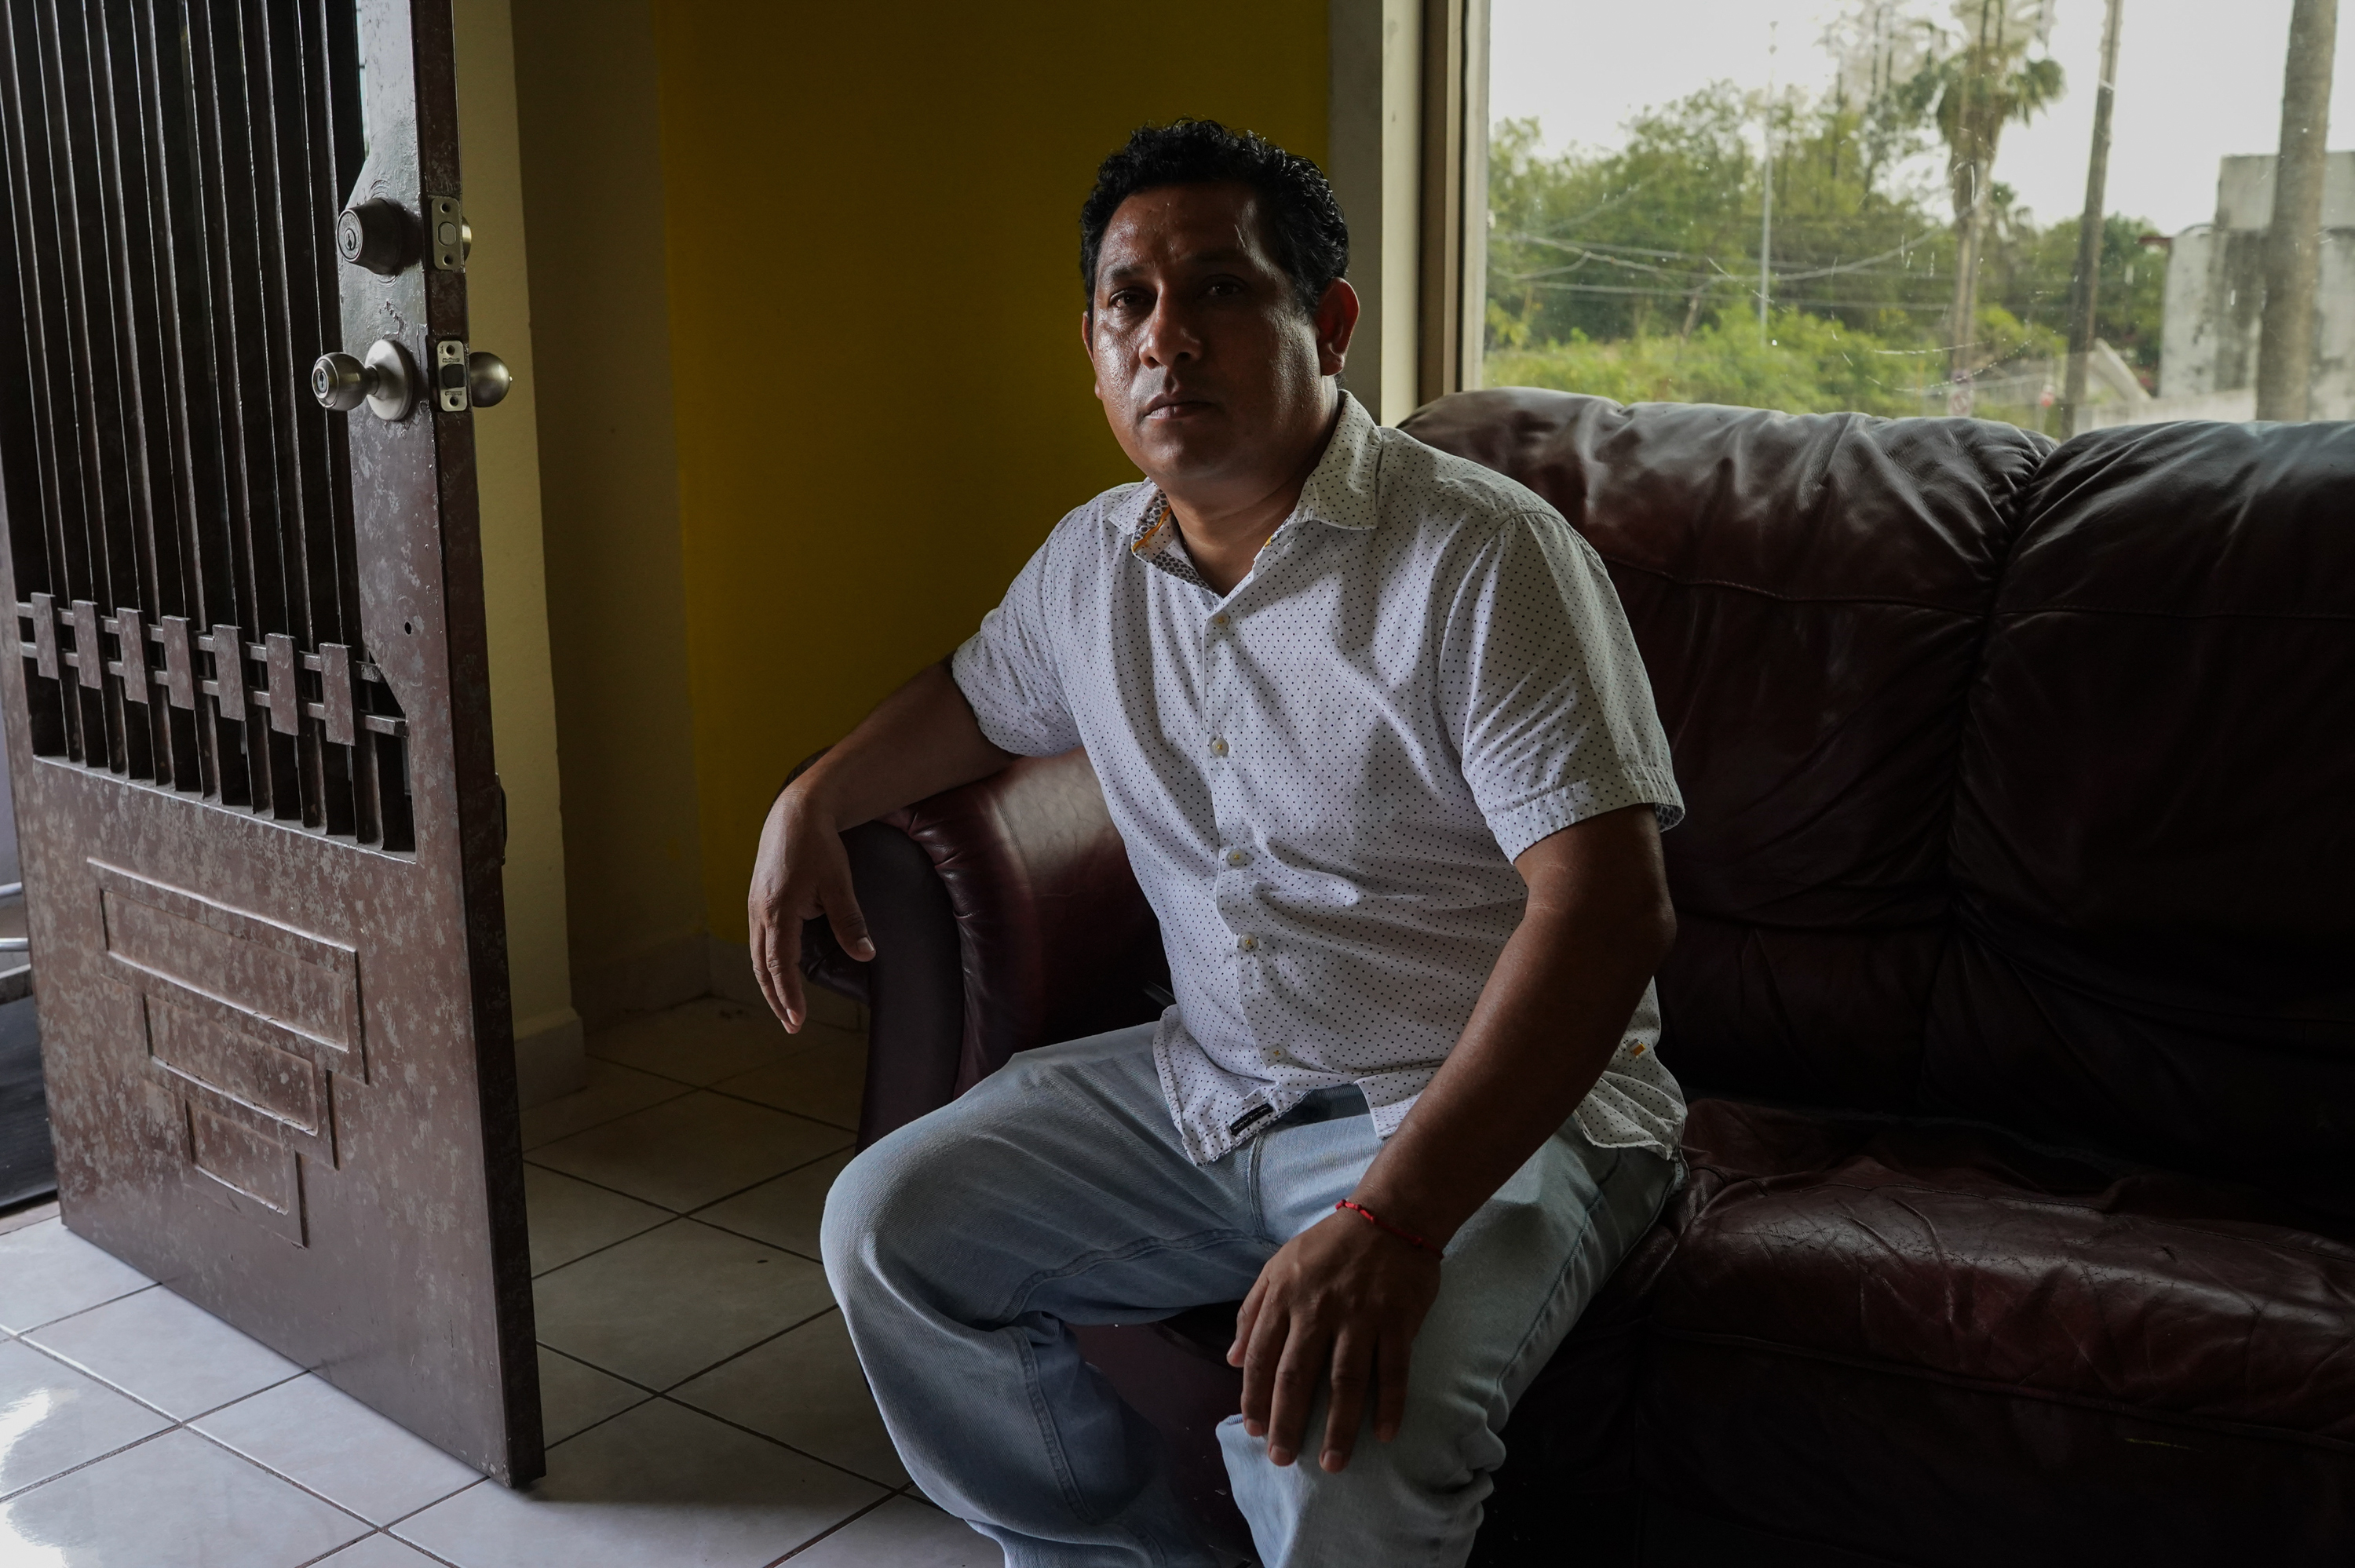 The director of Resource Center Matamoros, Hugo Terrones, spoke to Muckraker founder Anthony Rubin and his brother after the pair showed up at RCM